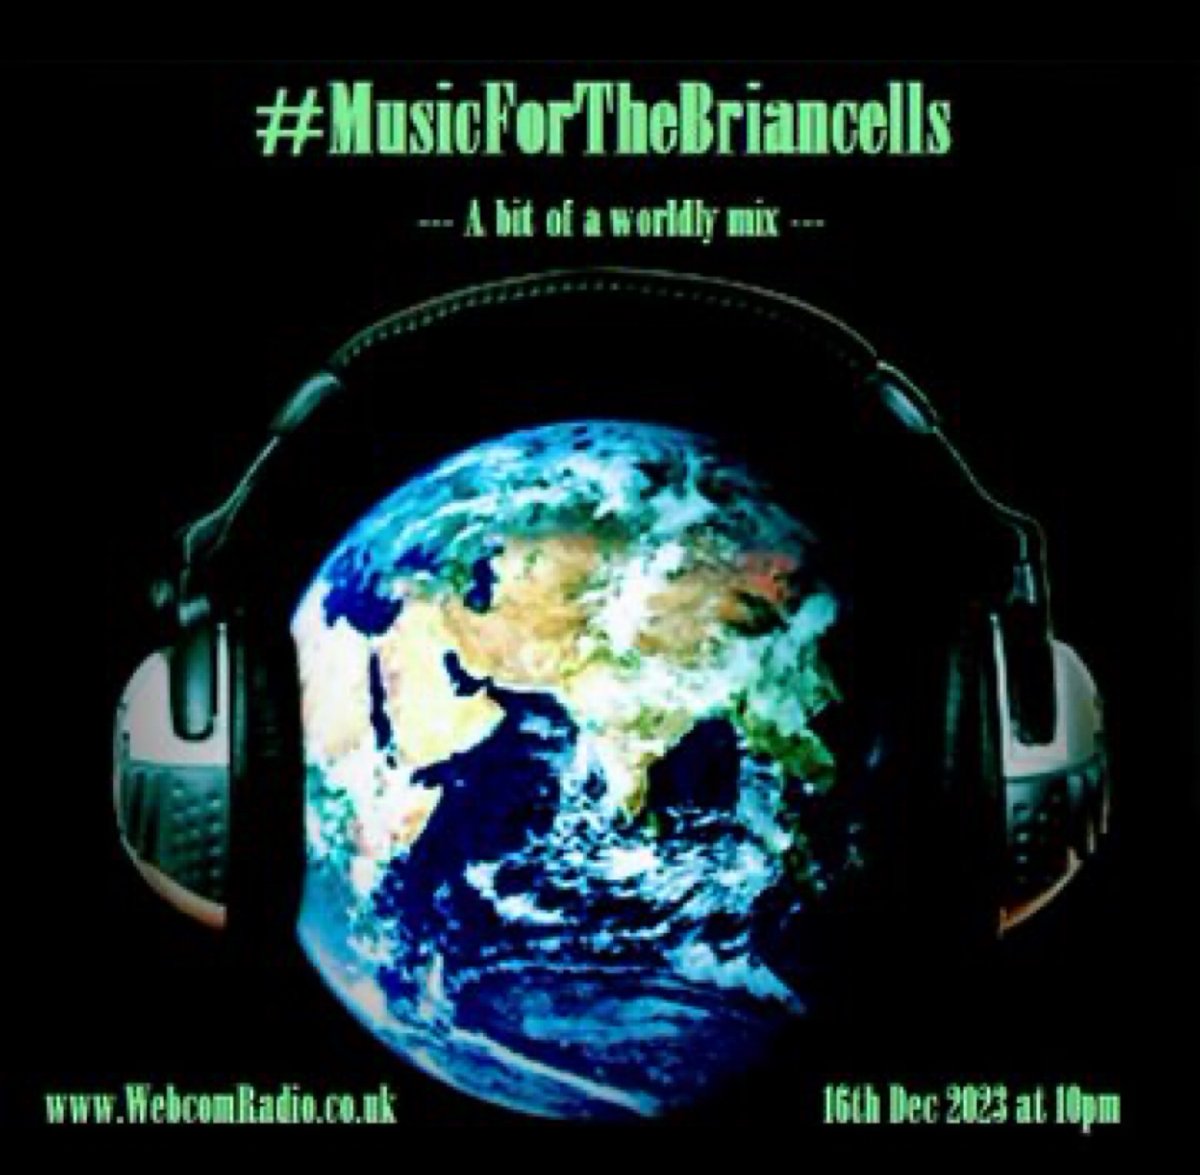 Its the boys turn on Saturday Night’s on webcomradio.co.uk kicking off at 9pm with @AndrewBrandNew The Andrew Douglas Show, followed at 10pm by @BrianBengal BrianCells.